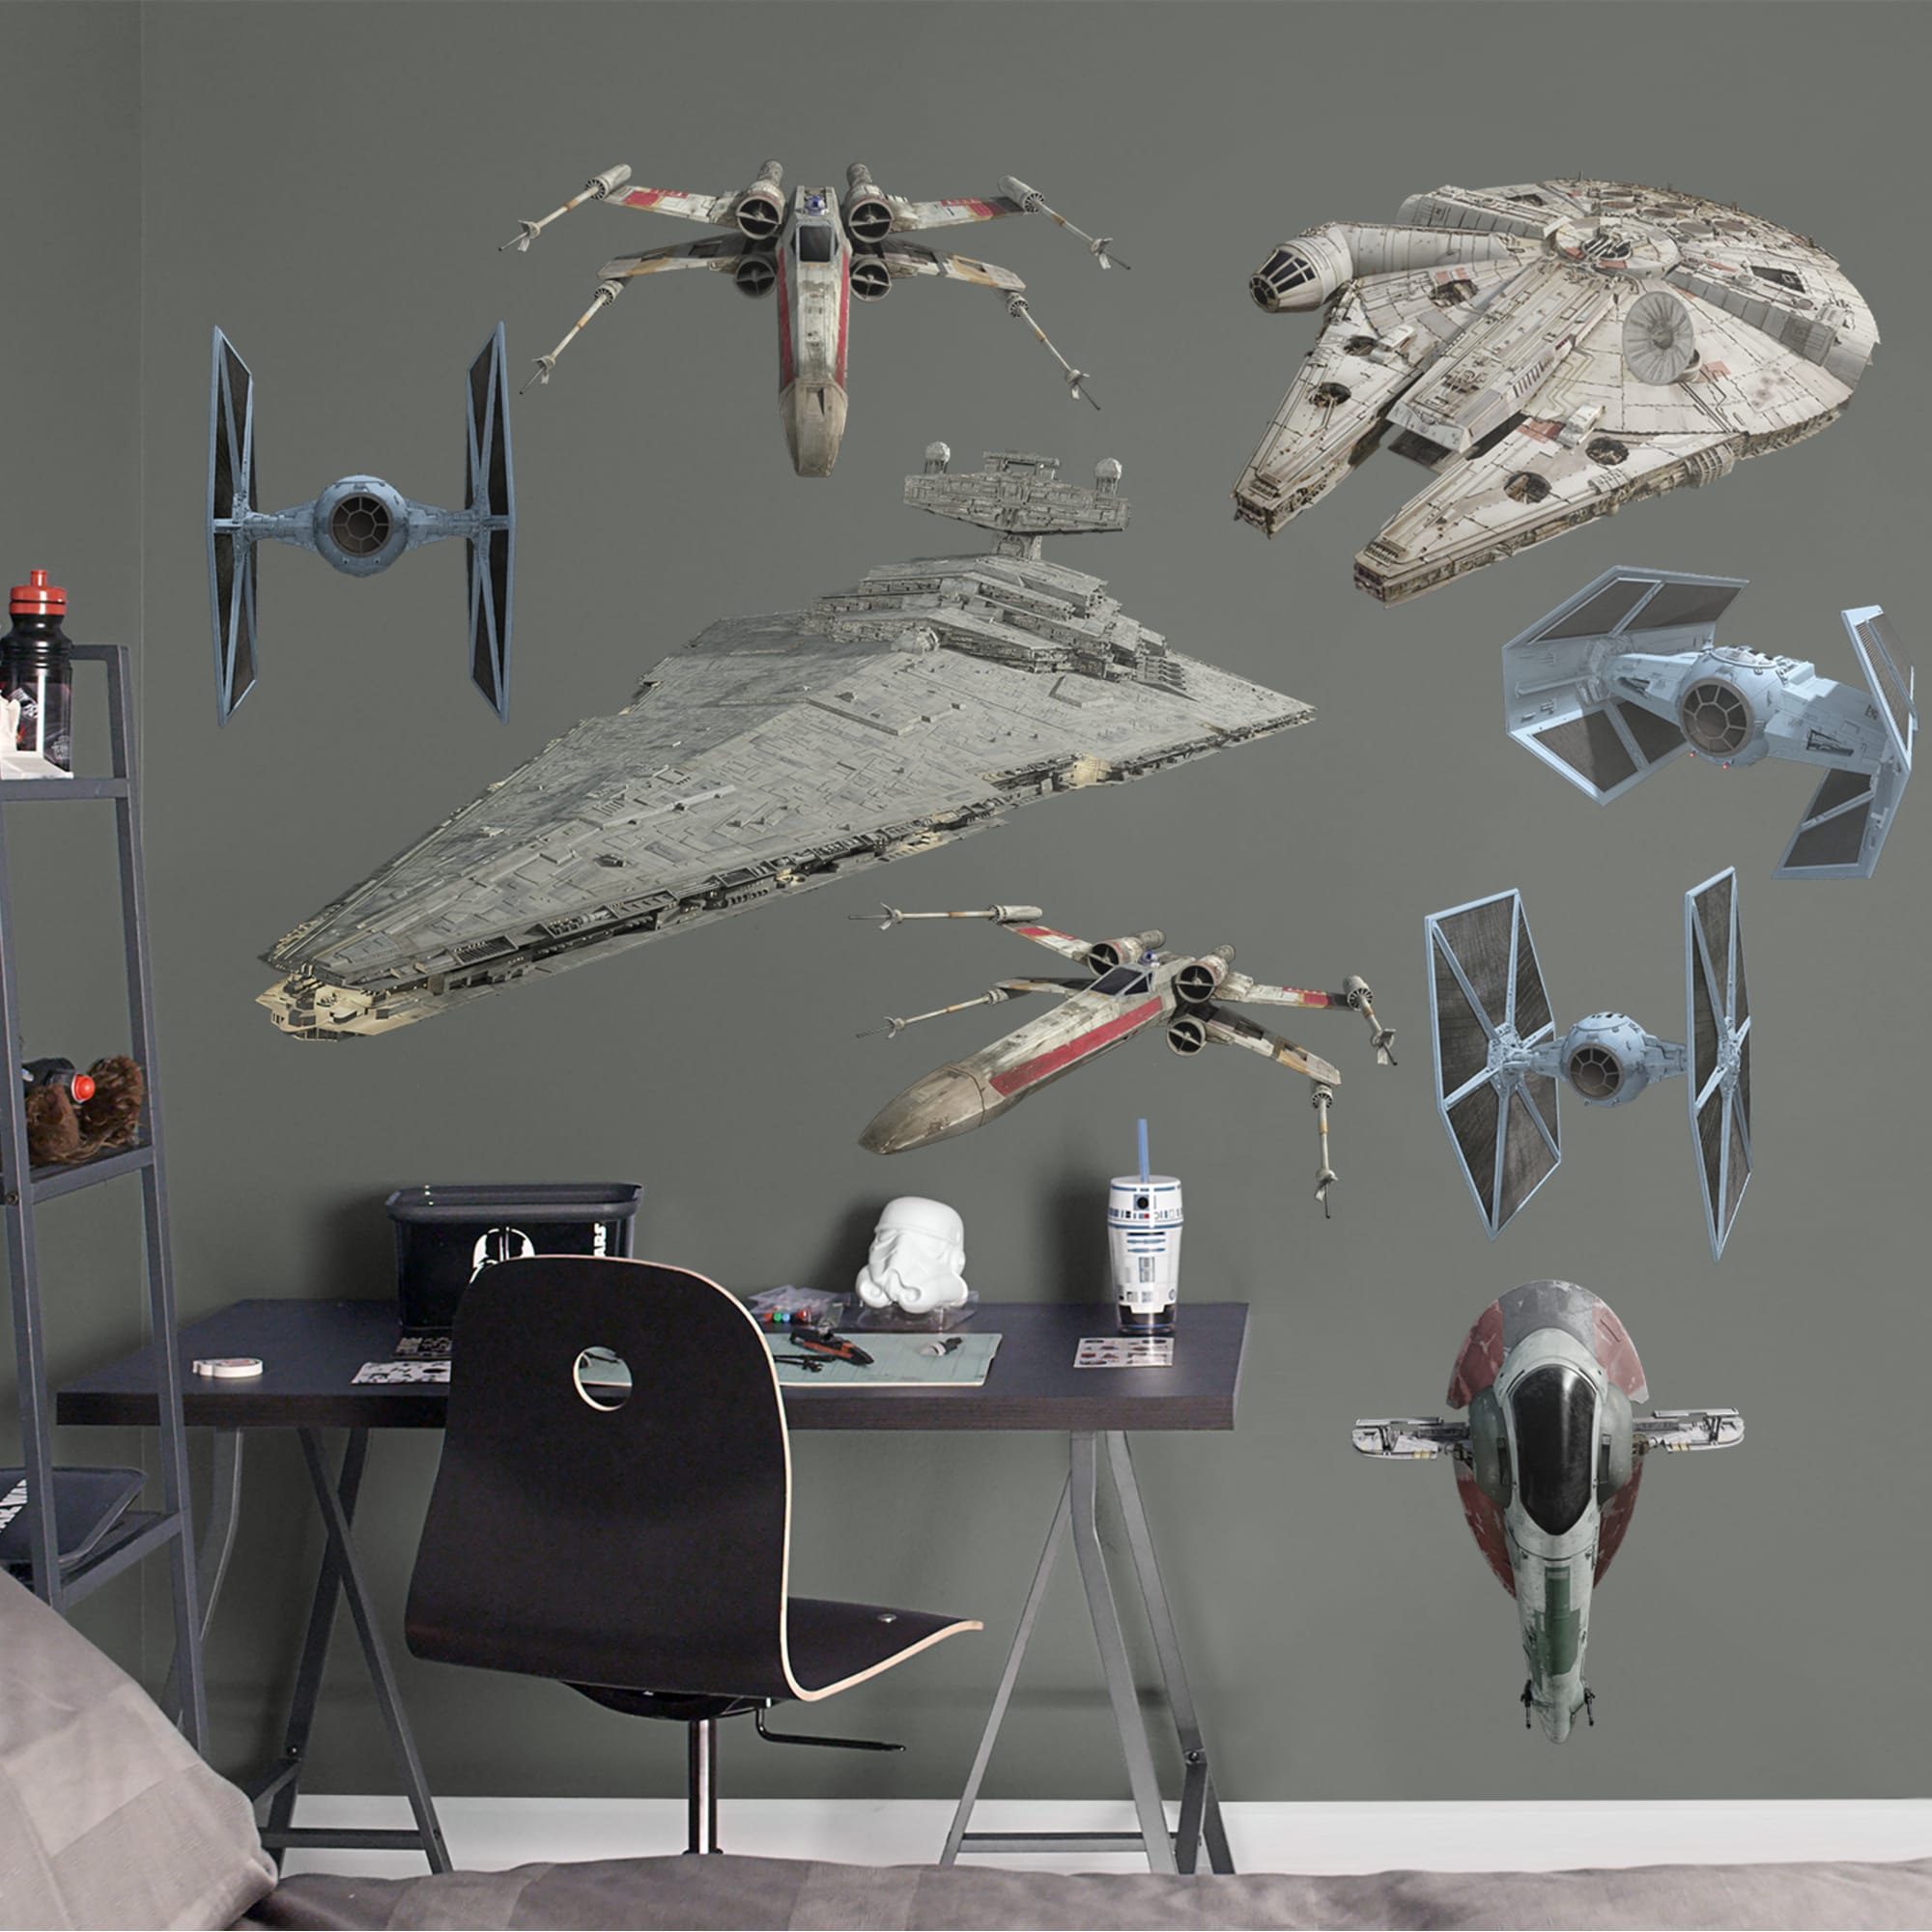 Star Wars: Original Trilogy Spaceships Collection - Officially Licensed Removable Wall Decals 79.0"W x 52.0"H by Fathead | Vinyl